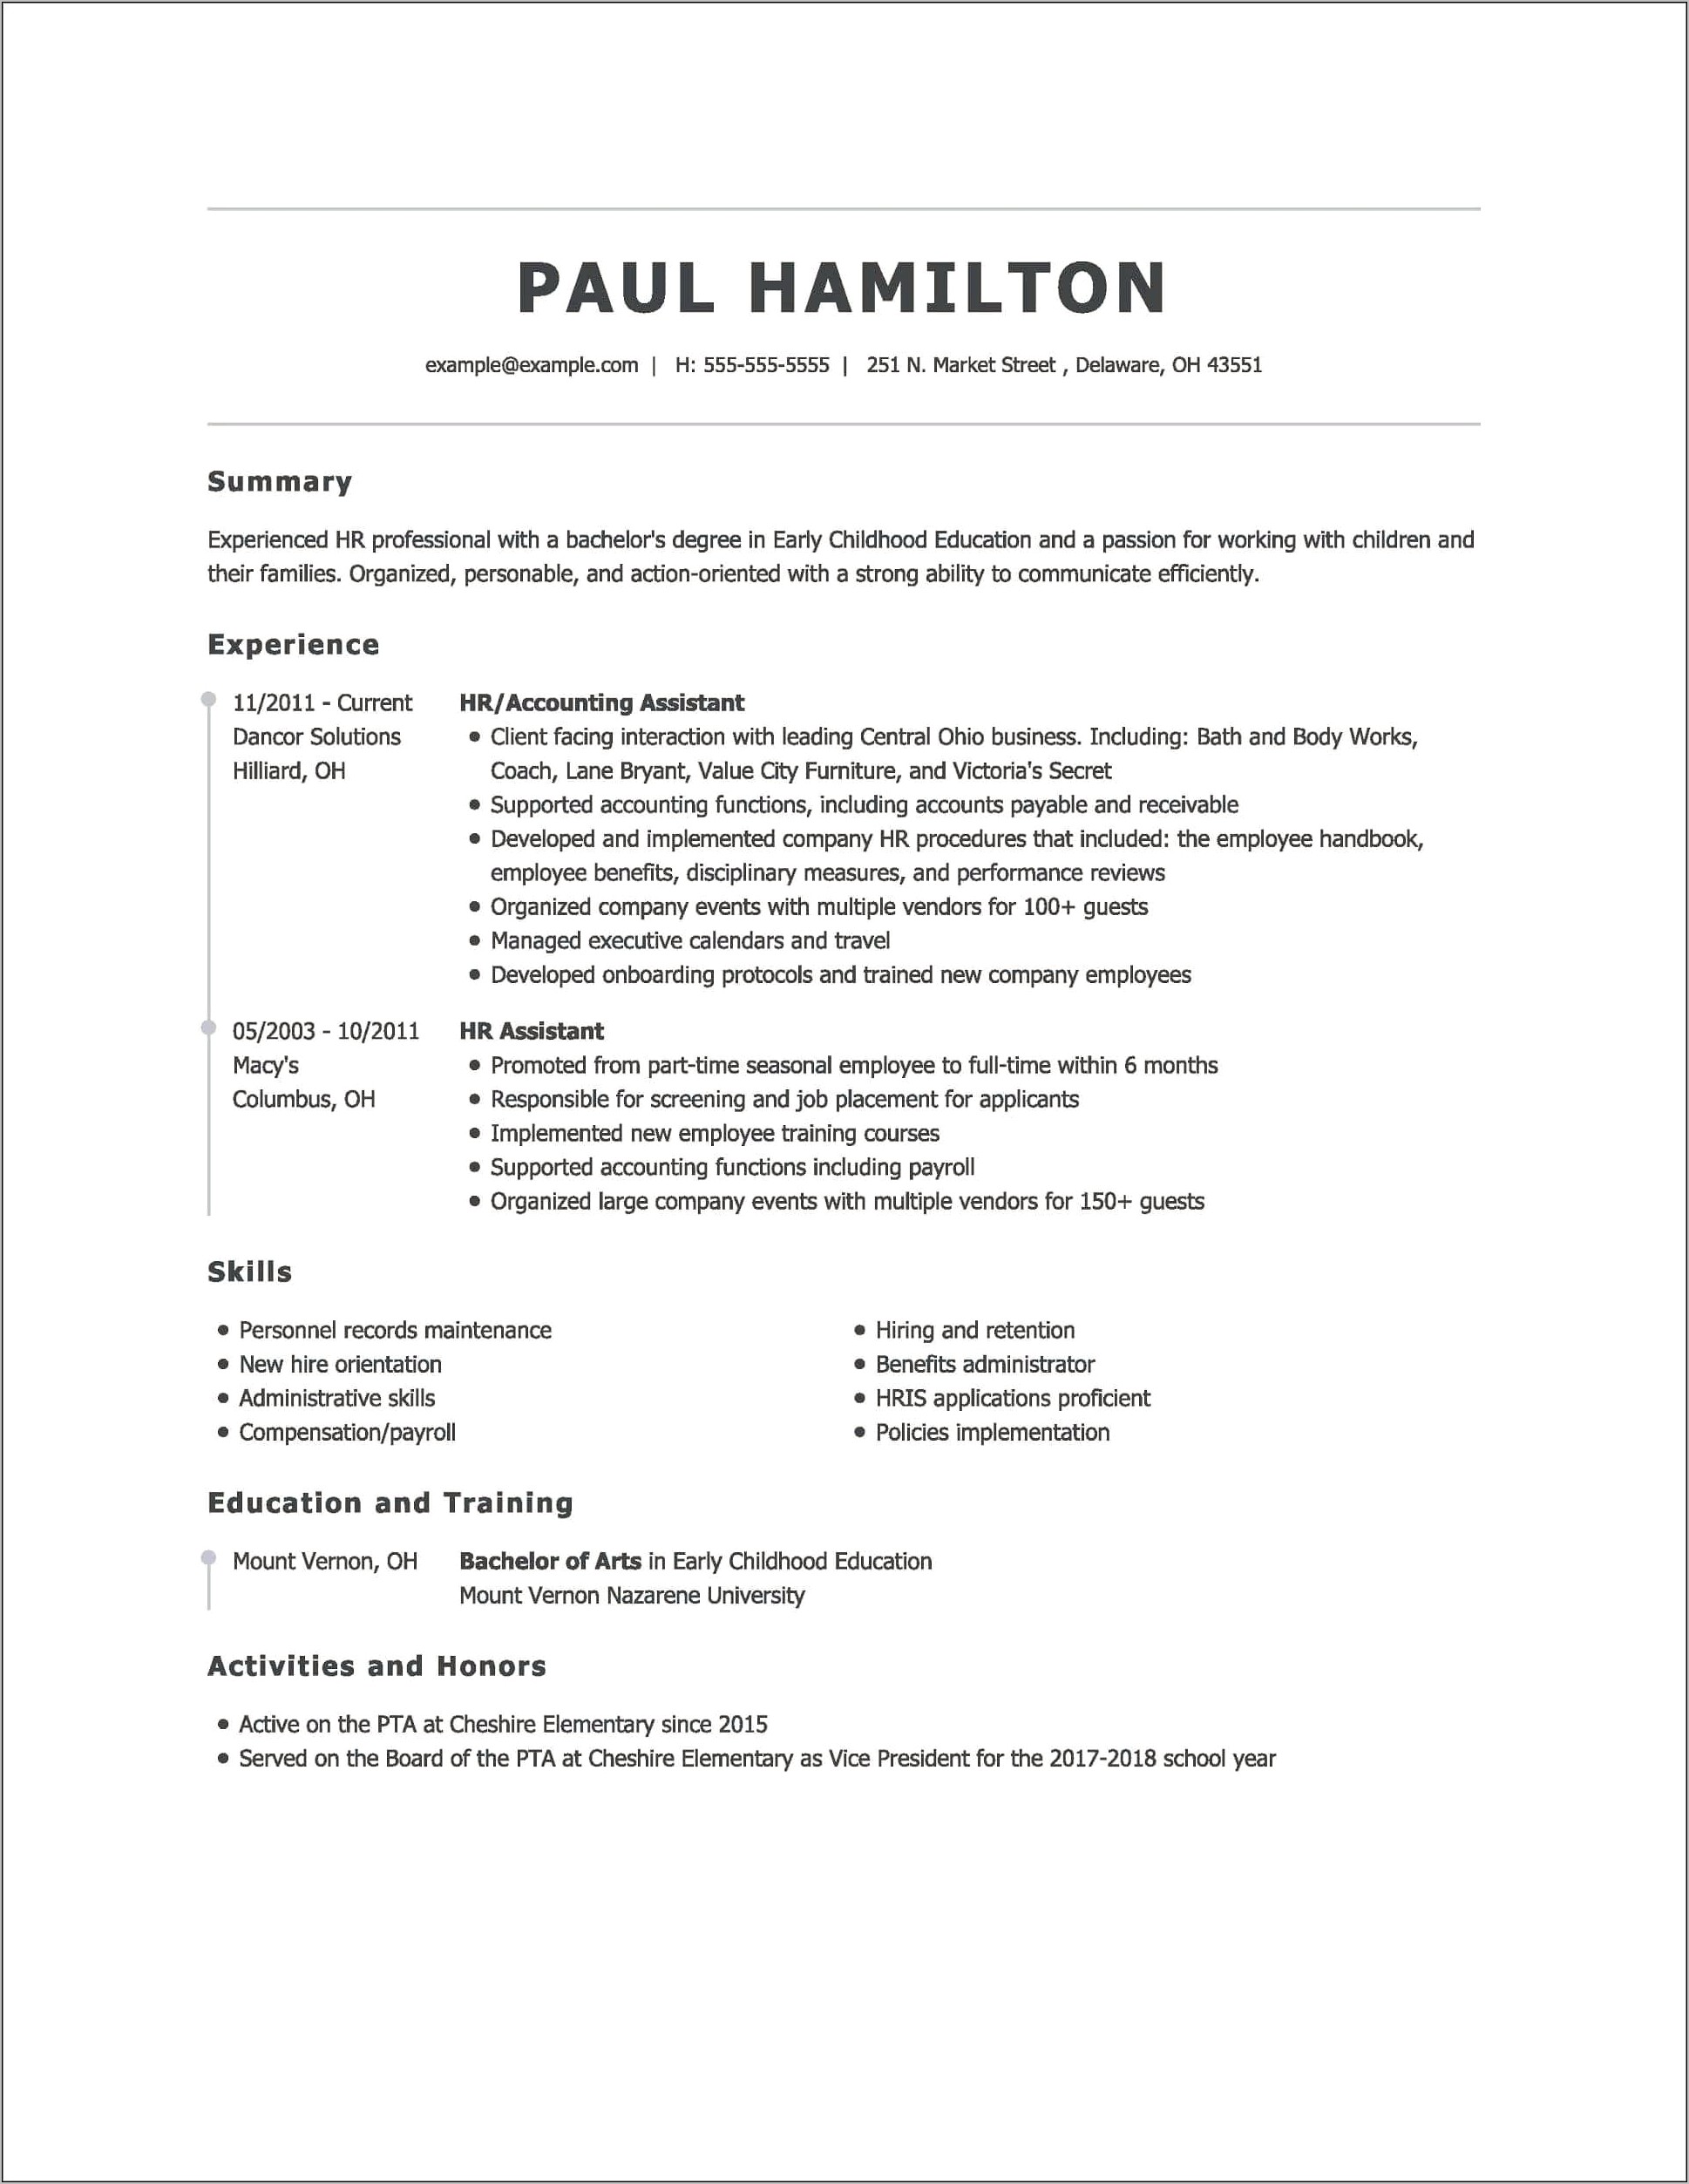 Example Of A Online Resume With Bullets